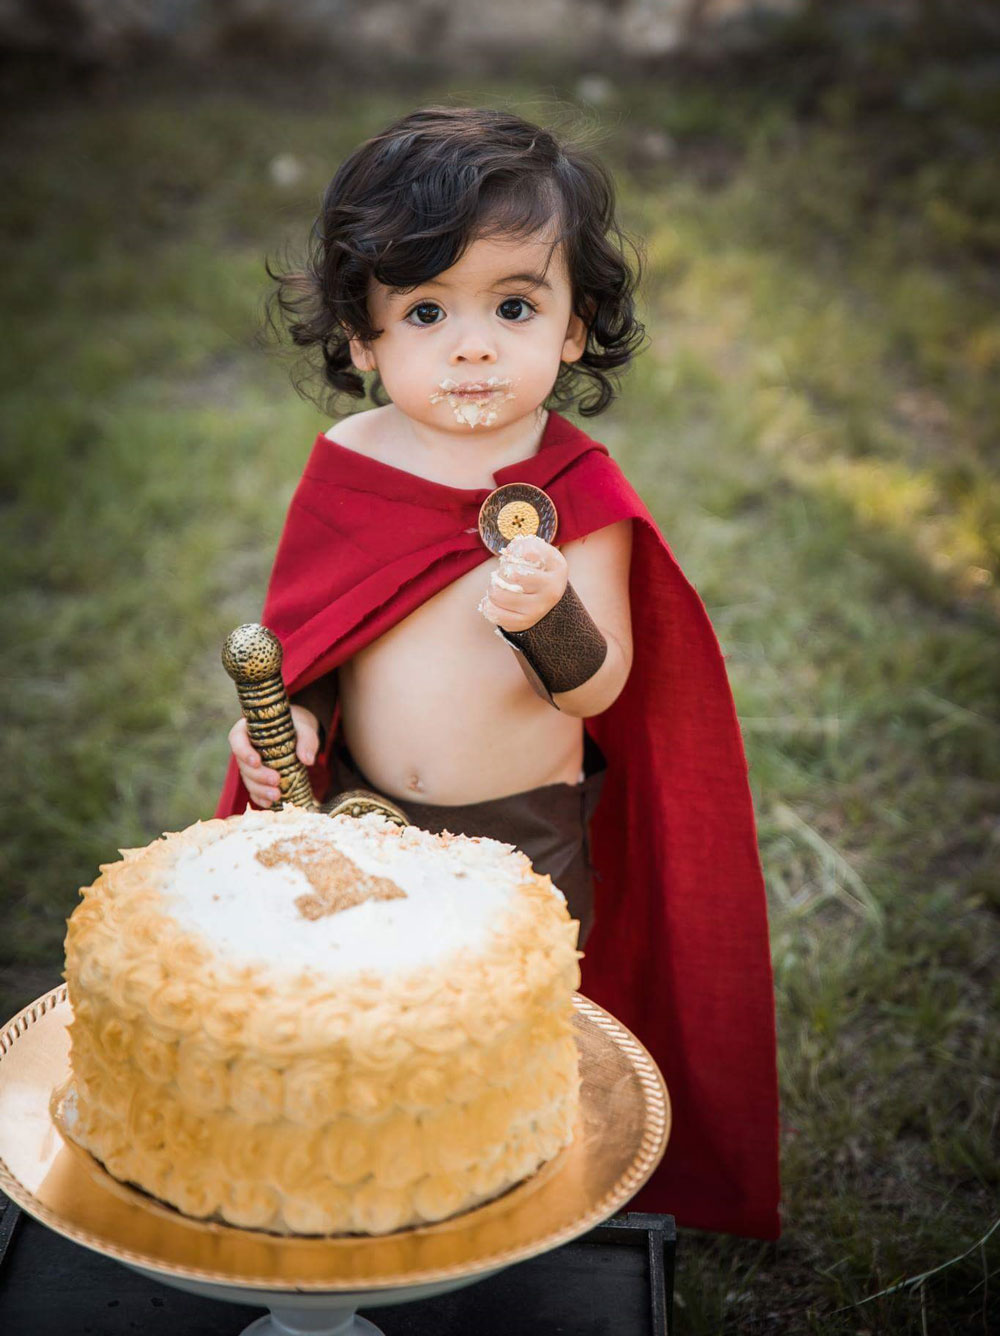 My son's name is Leonidas Adrian and here is how his cake smash pictures went